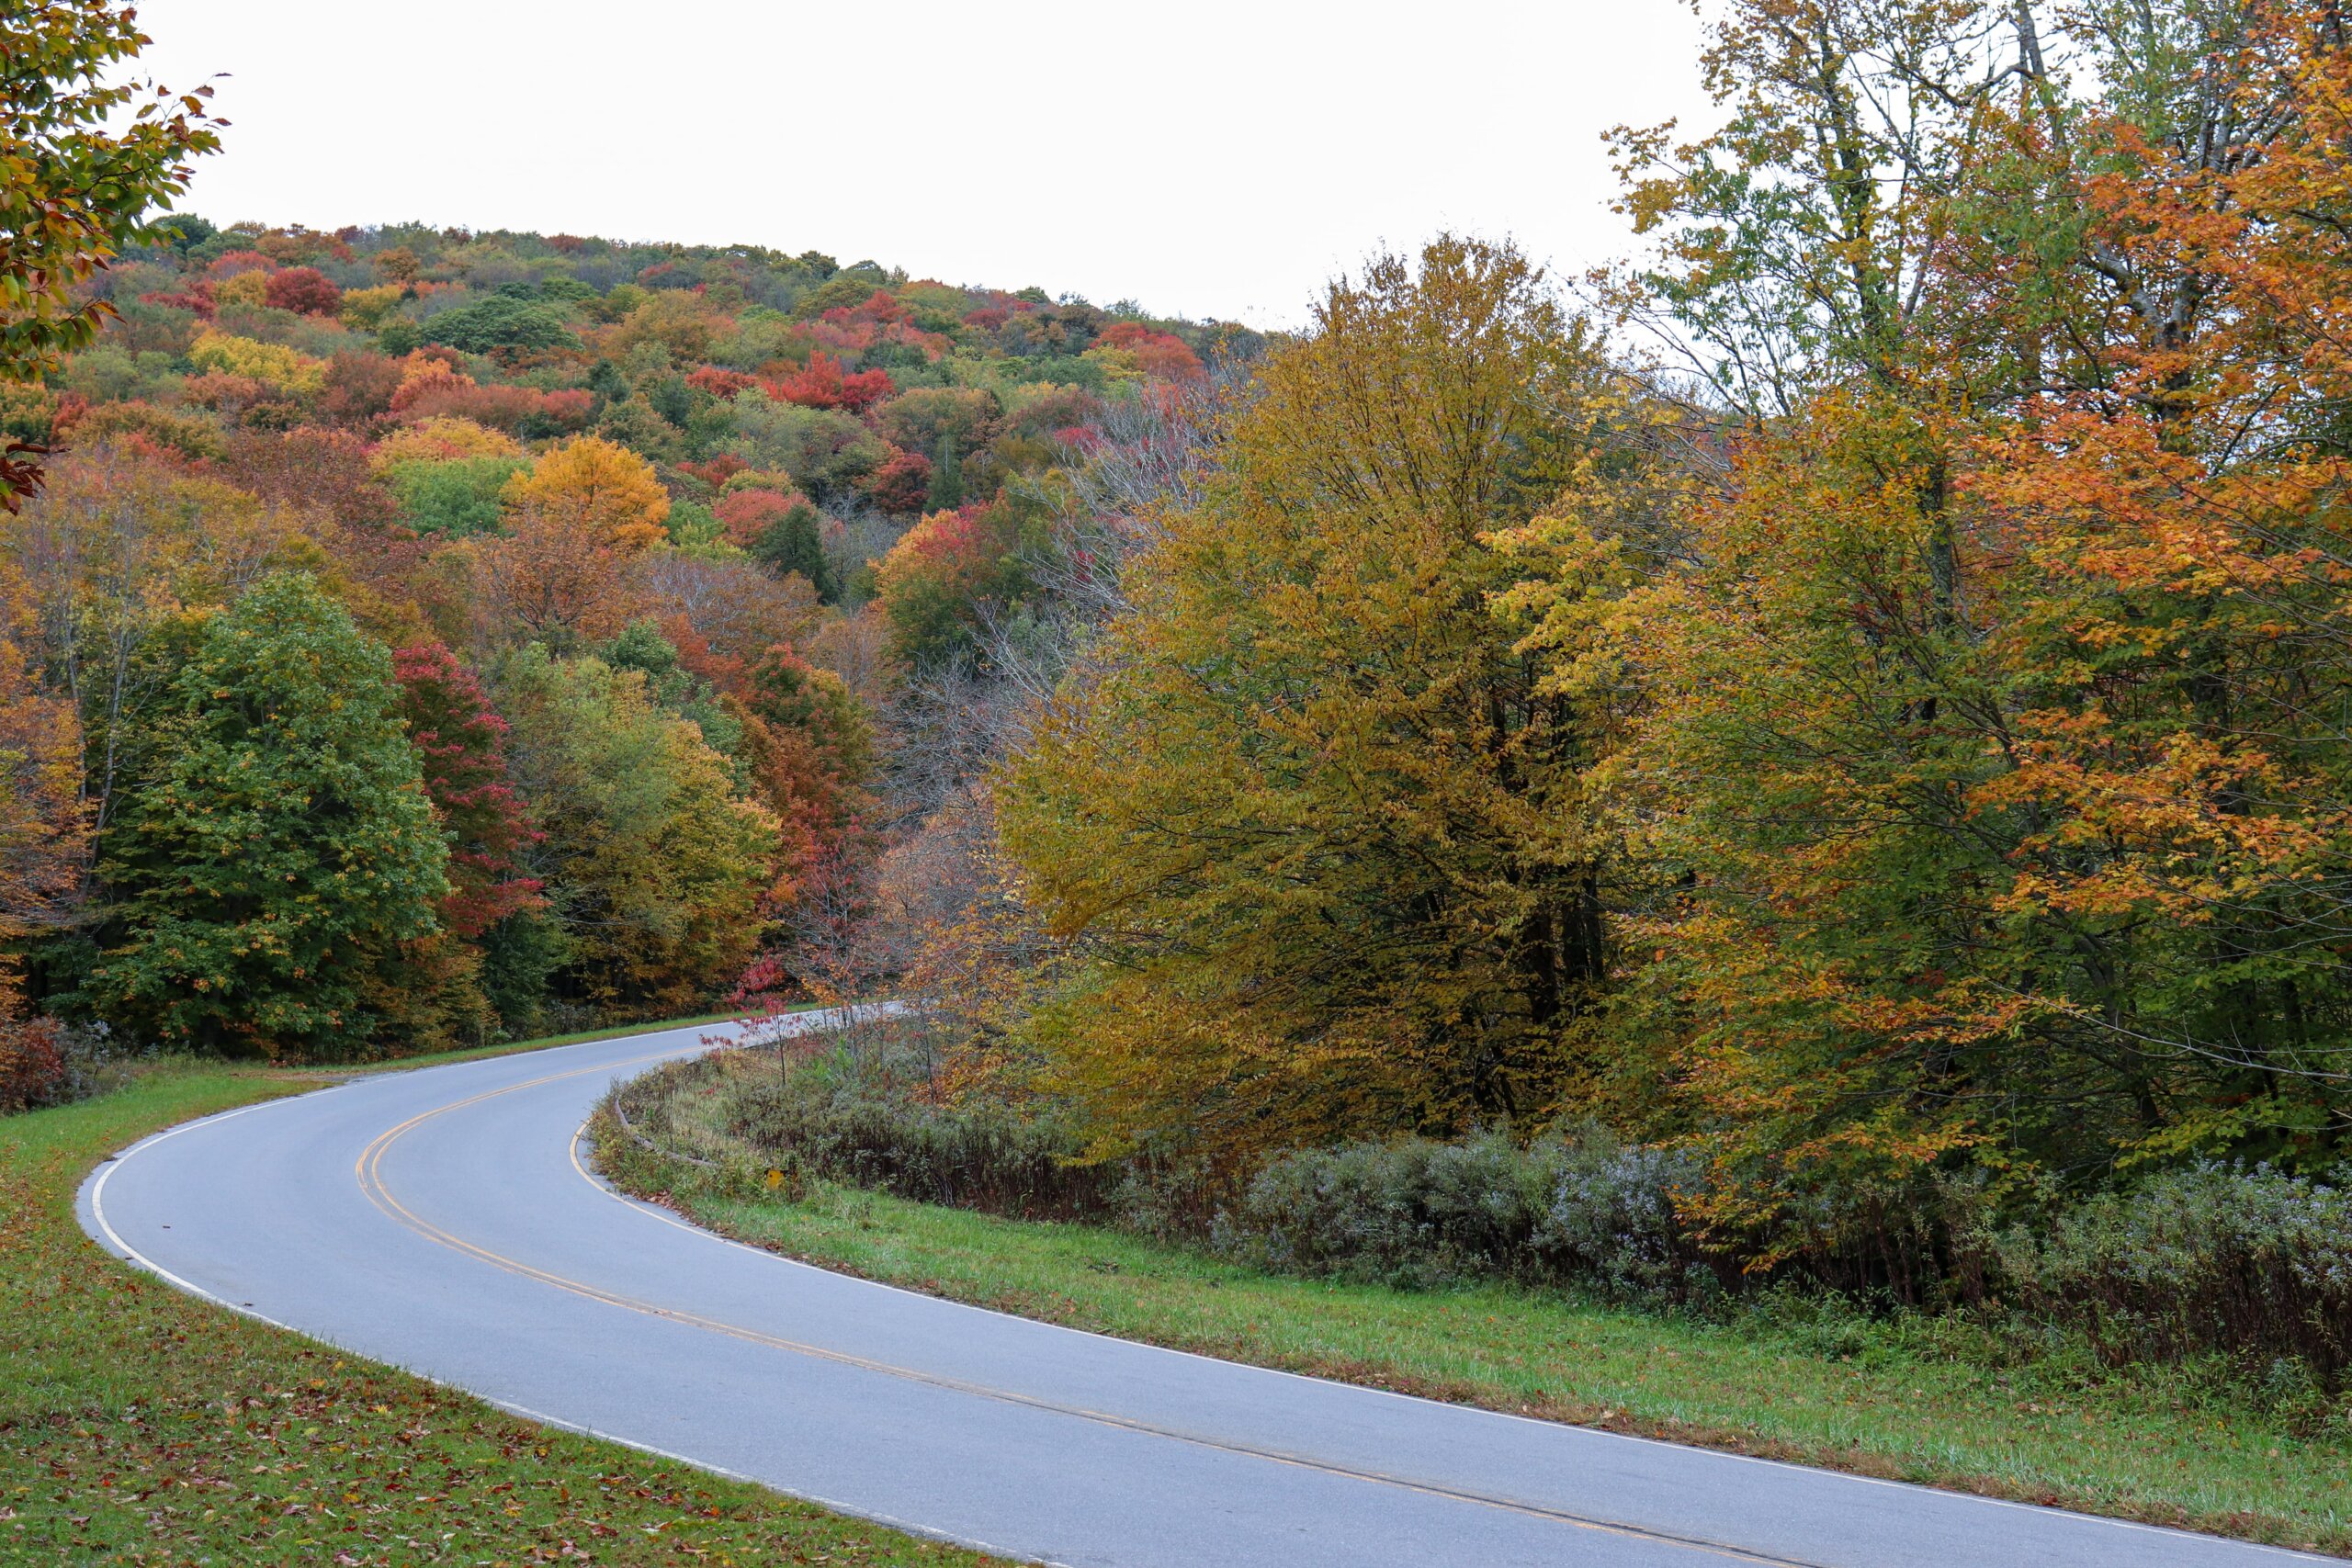 Why You Need to Enjoy the Cherohala Skyway for a Fall Drive